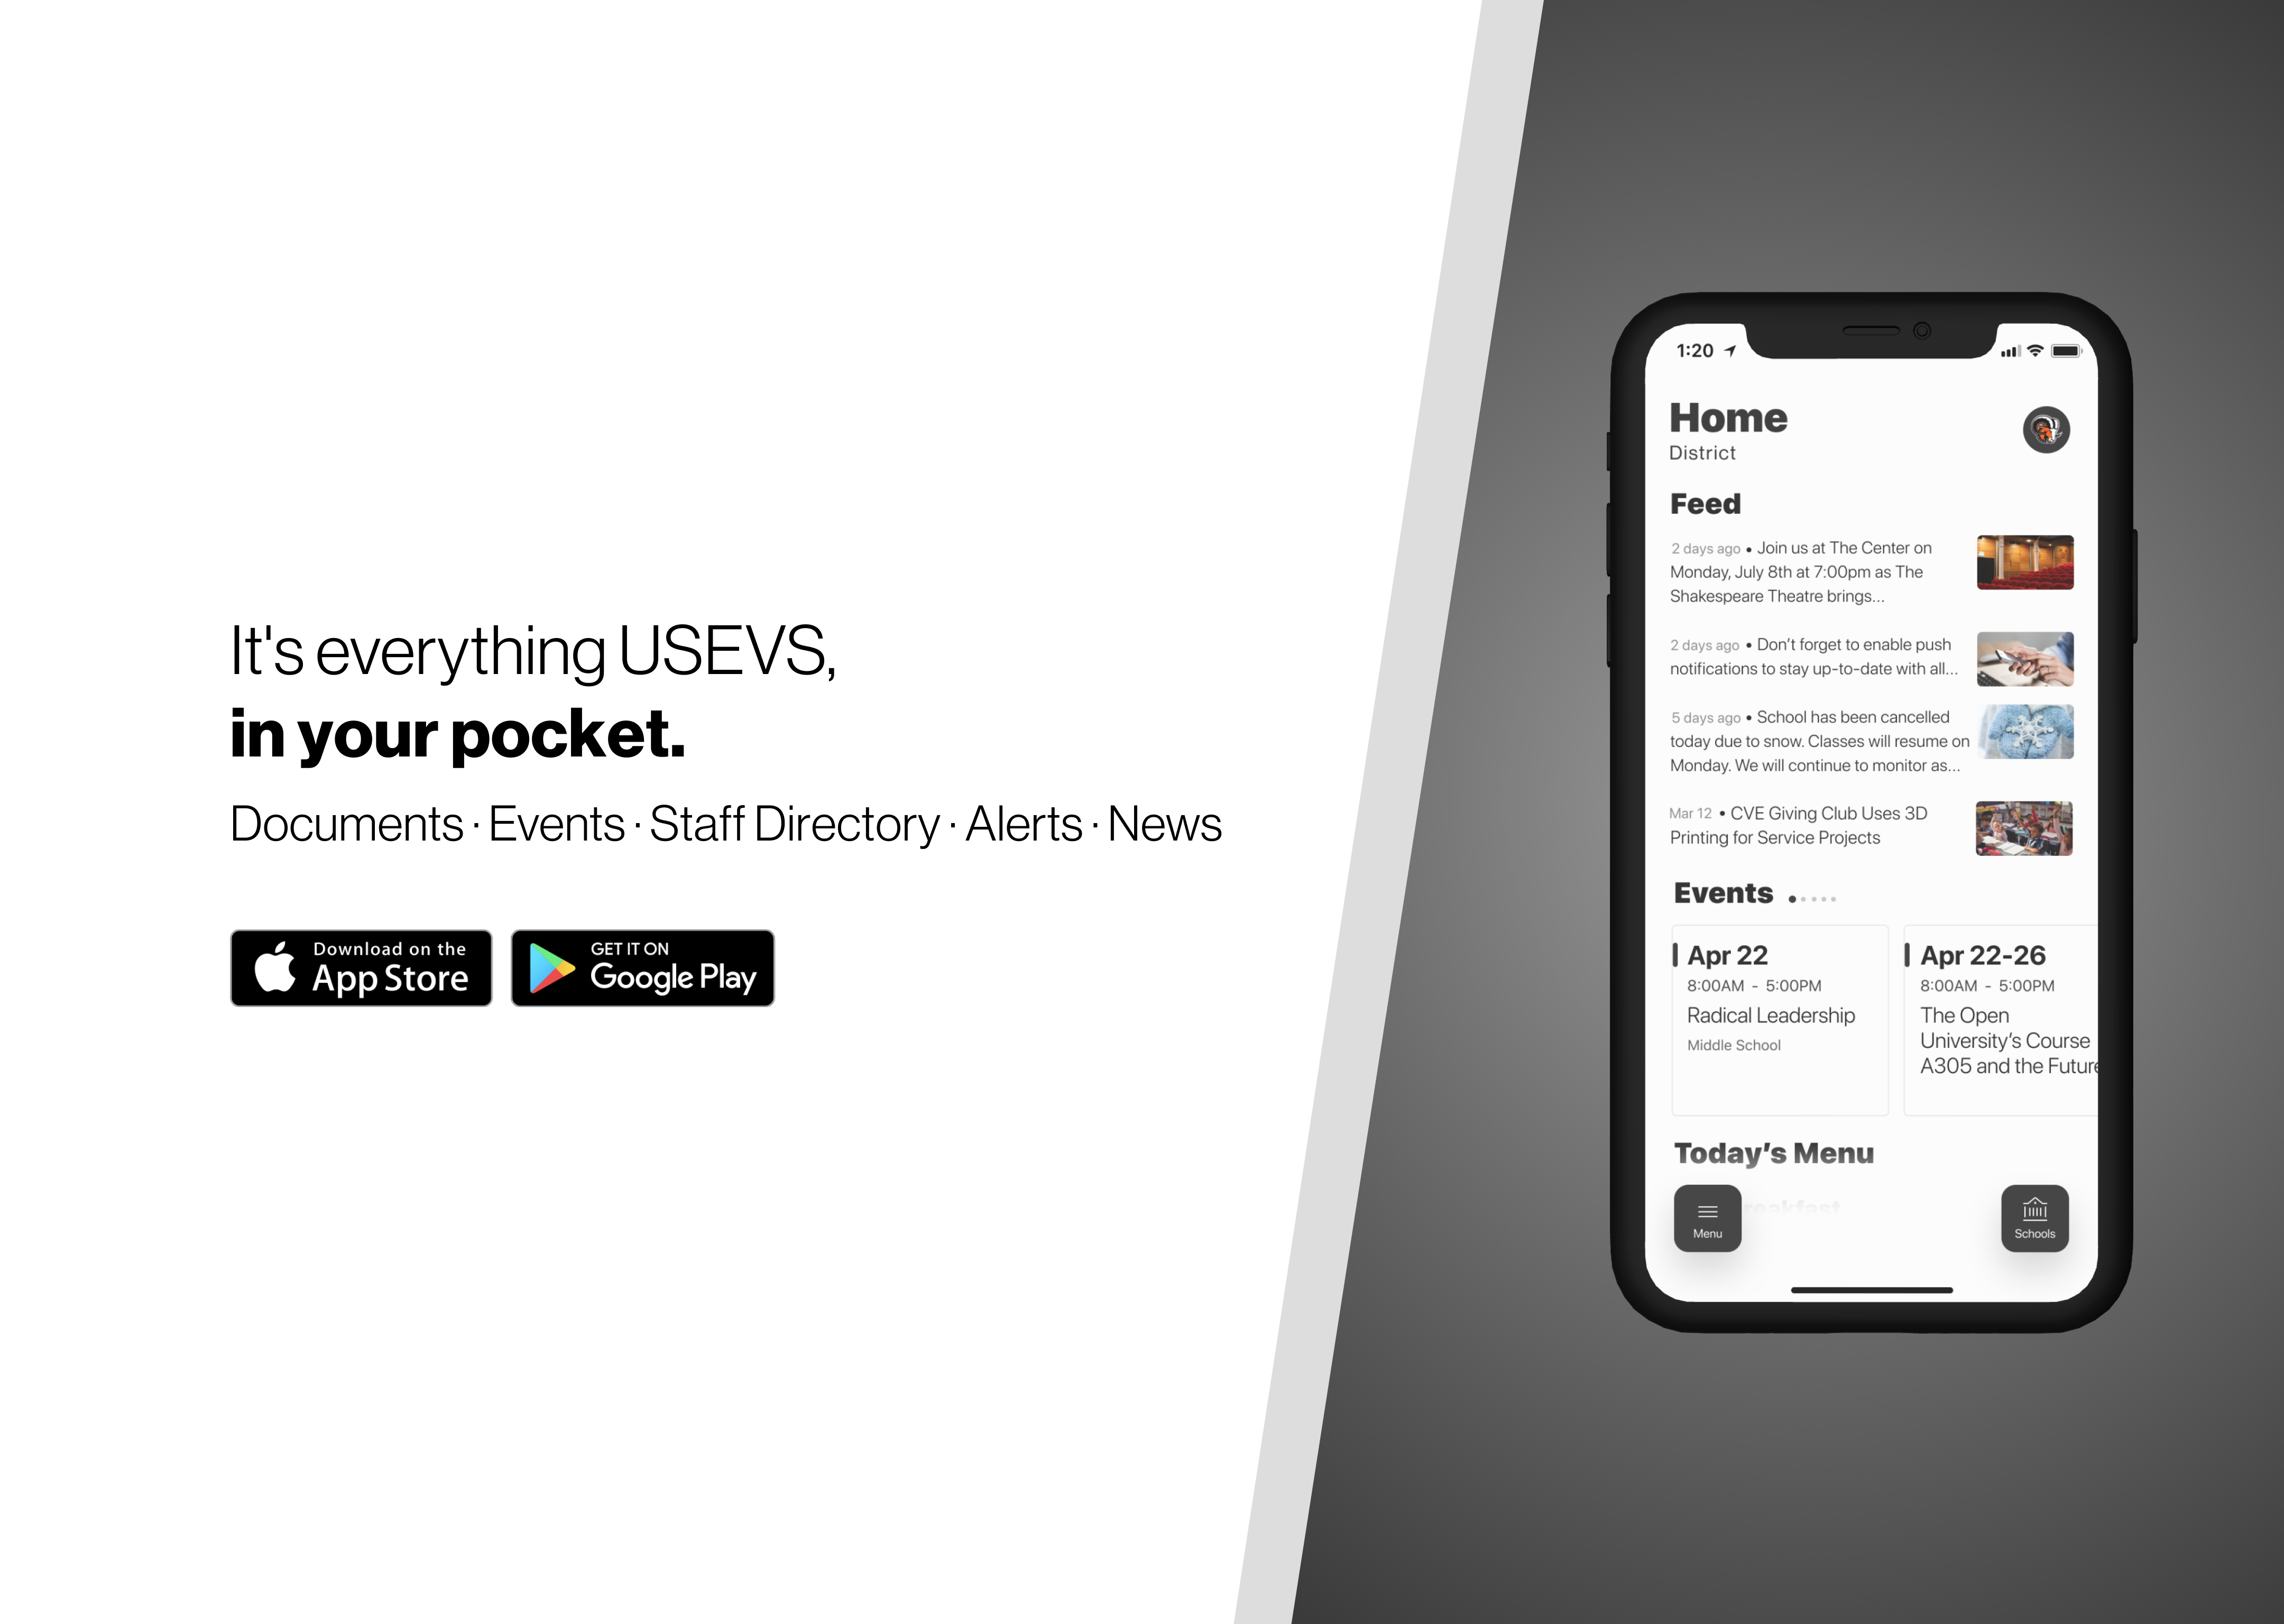 It's everything USEVS in your pocket